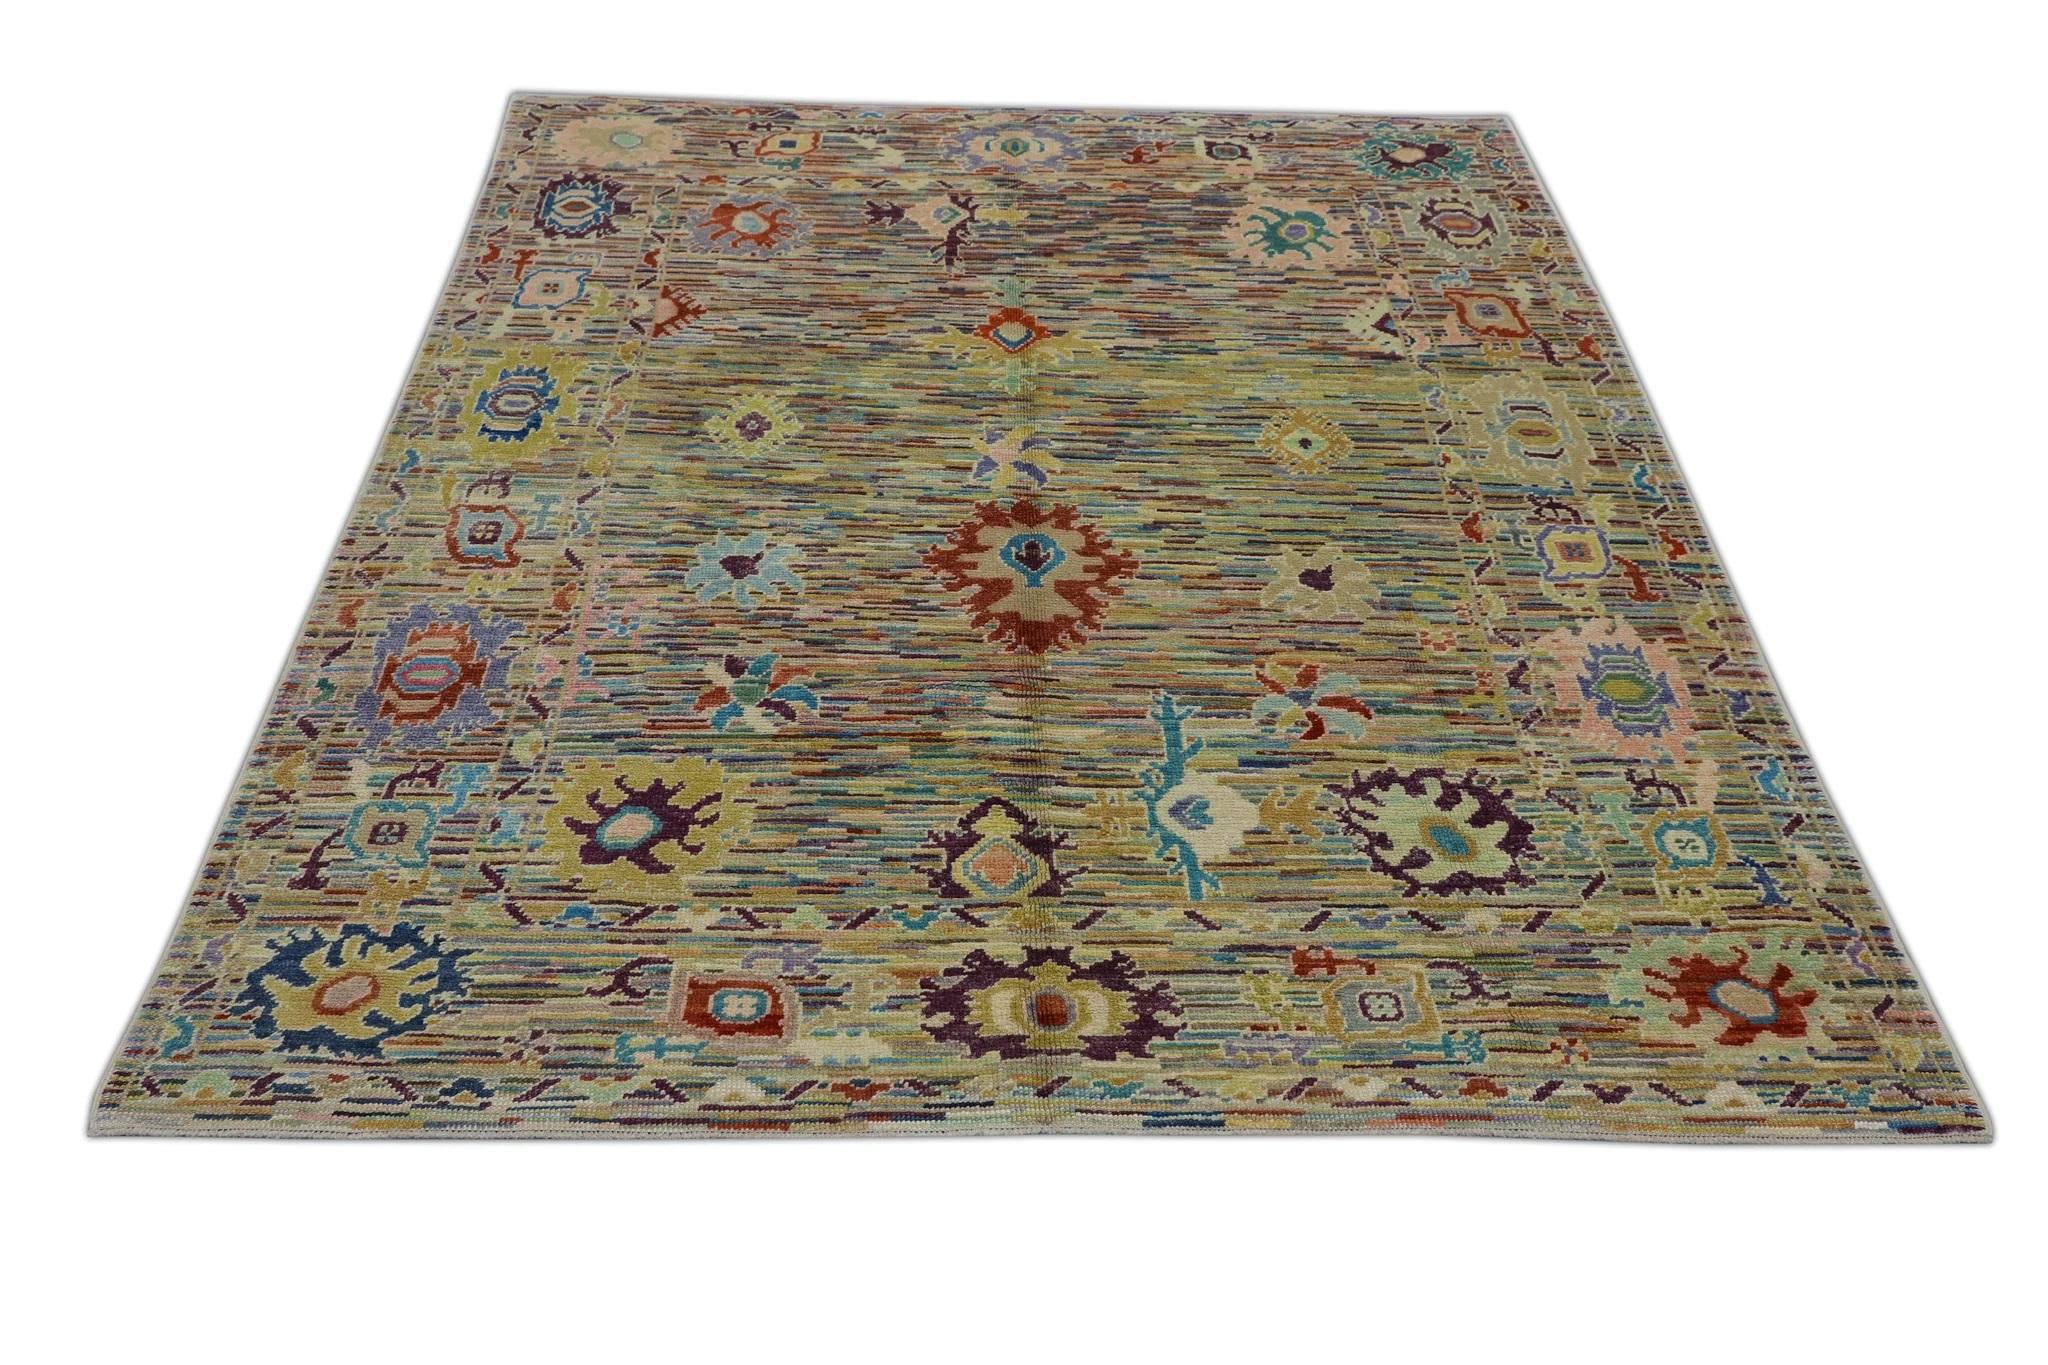 Handwoven Wool Turkish Oushak Rug in Colorful Geometric Floral Design 8' x 10'1